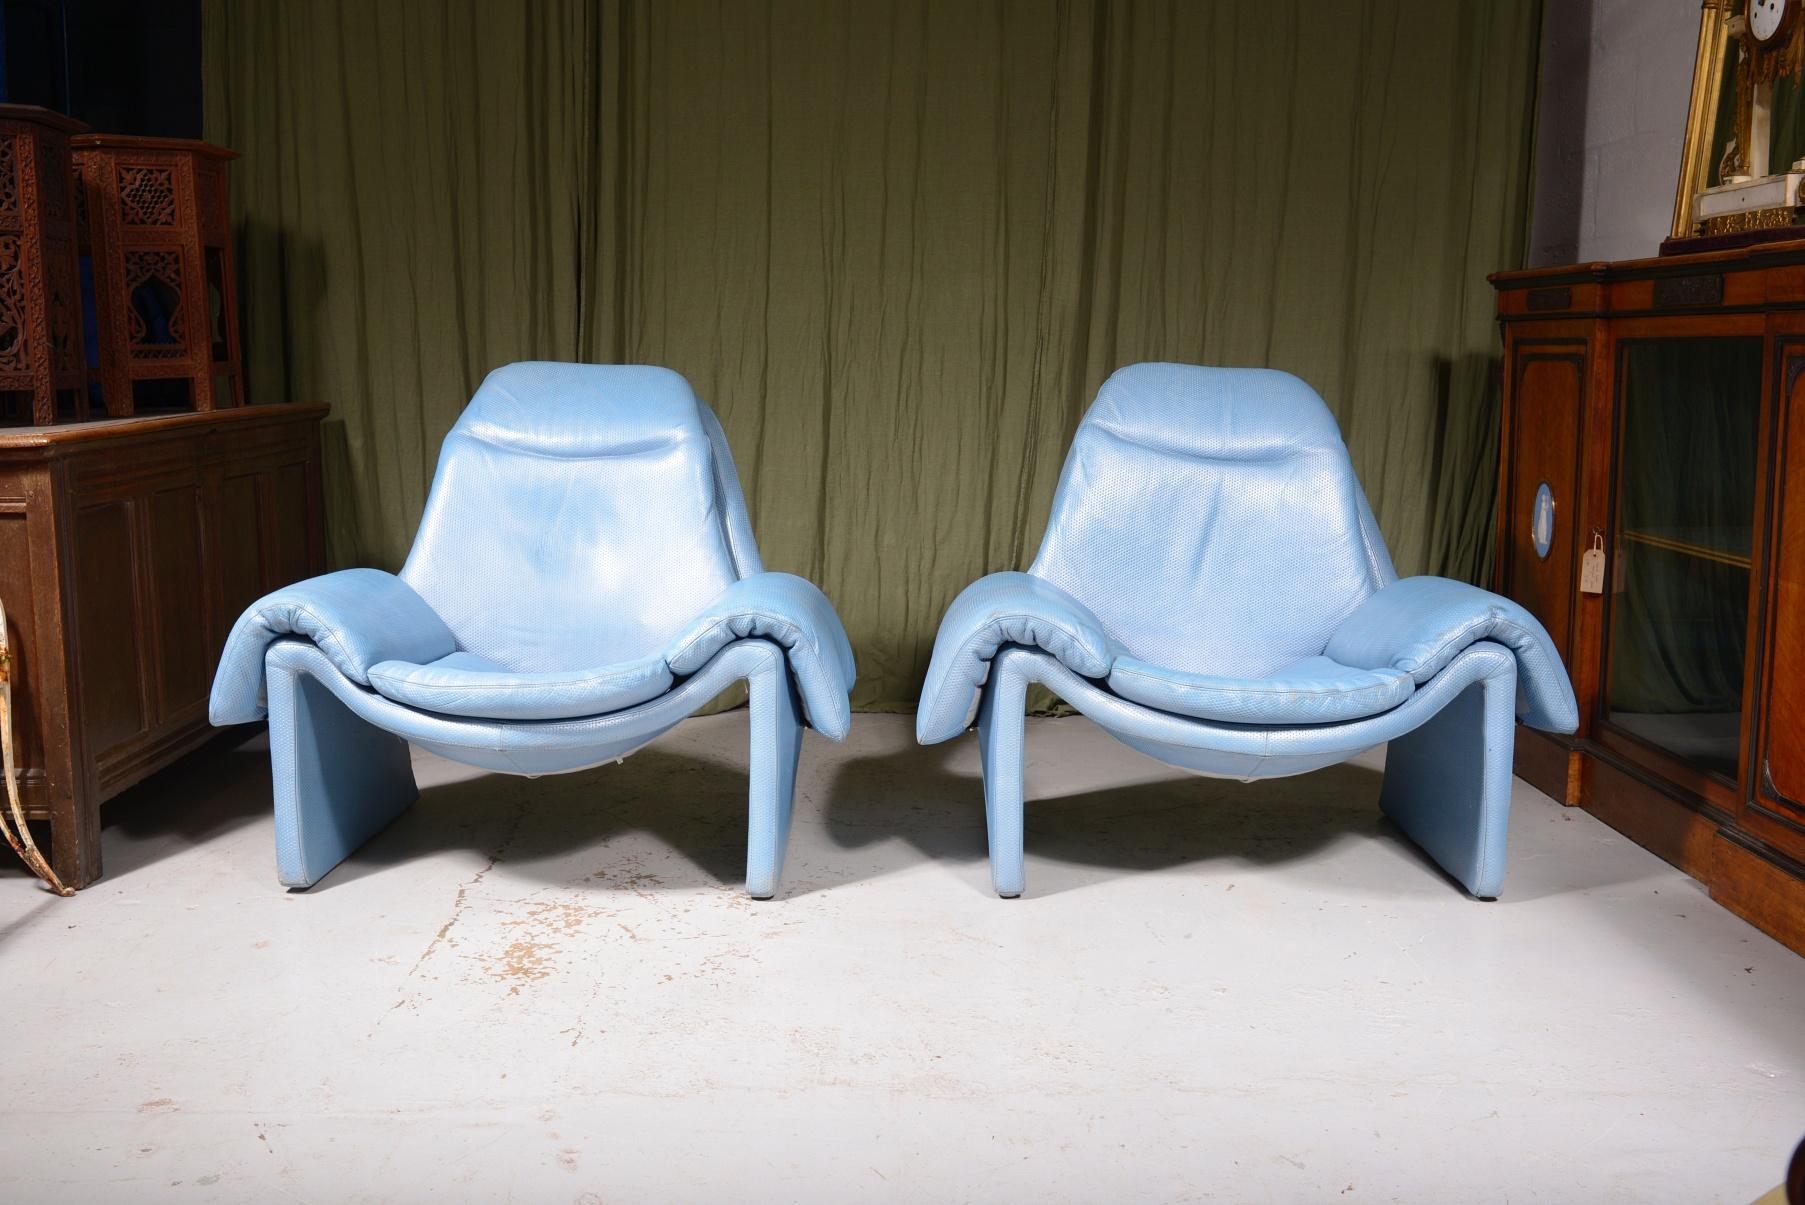 A super stylish and very comfortable pair of P60 Perforated Blue Leather Lounge Chairs By Vittorio Introini for Saporiti, made for the Proposals series, dating to the 1960’s.